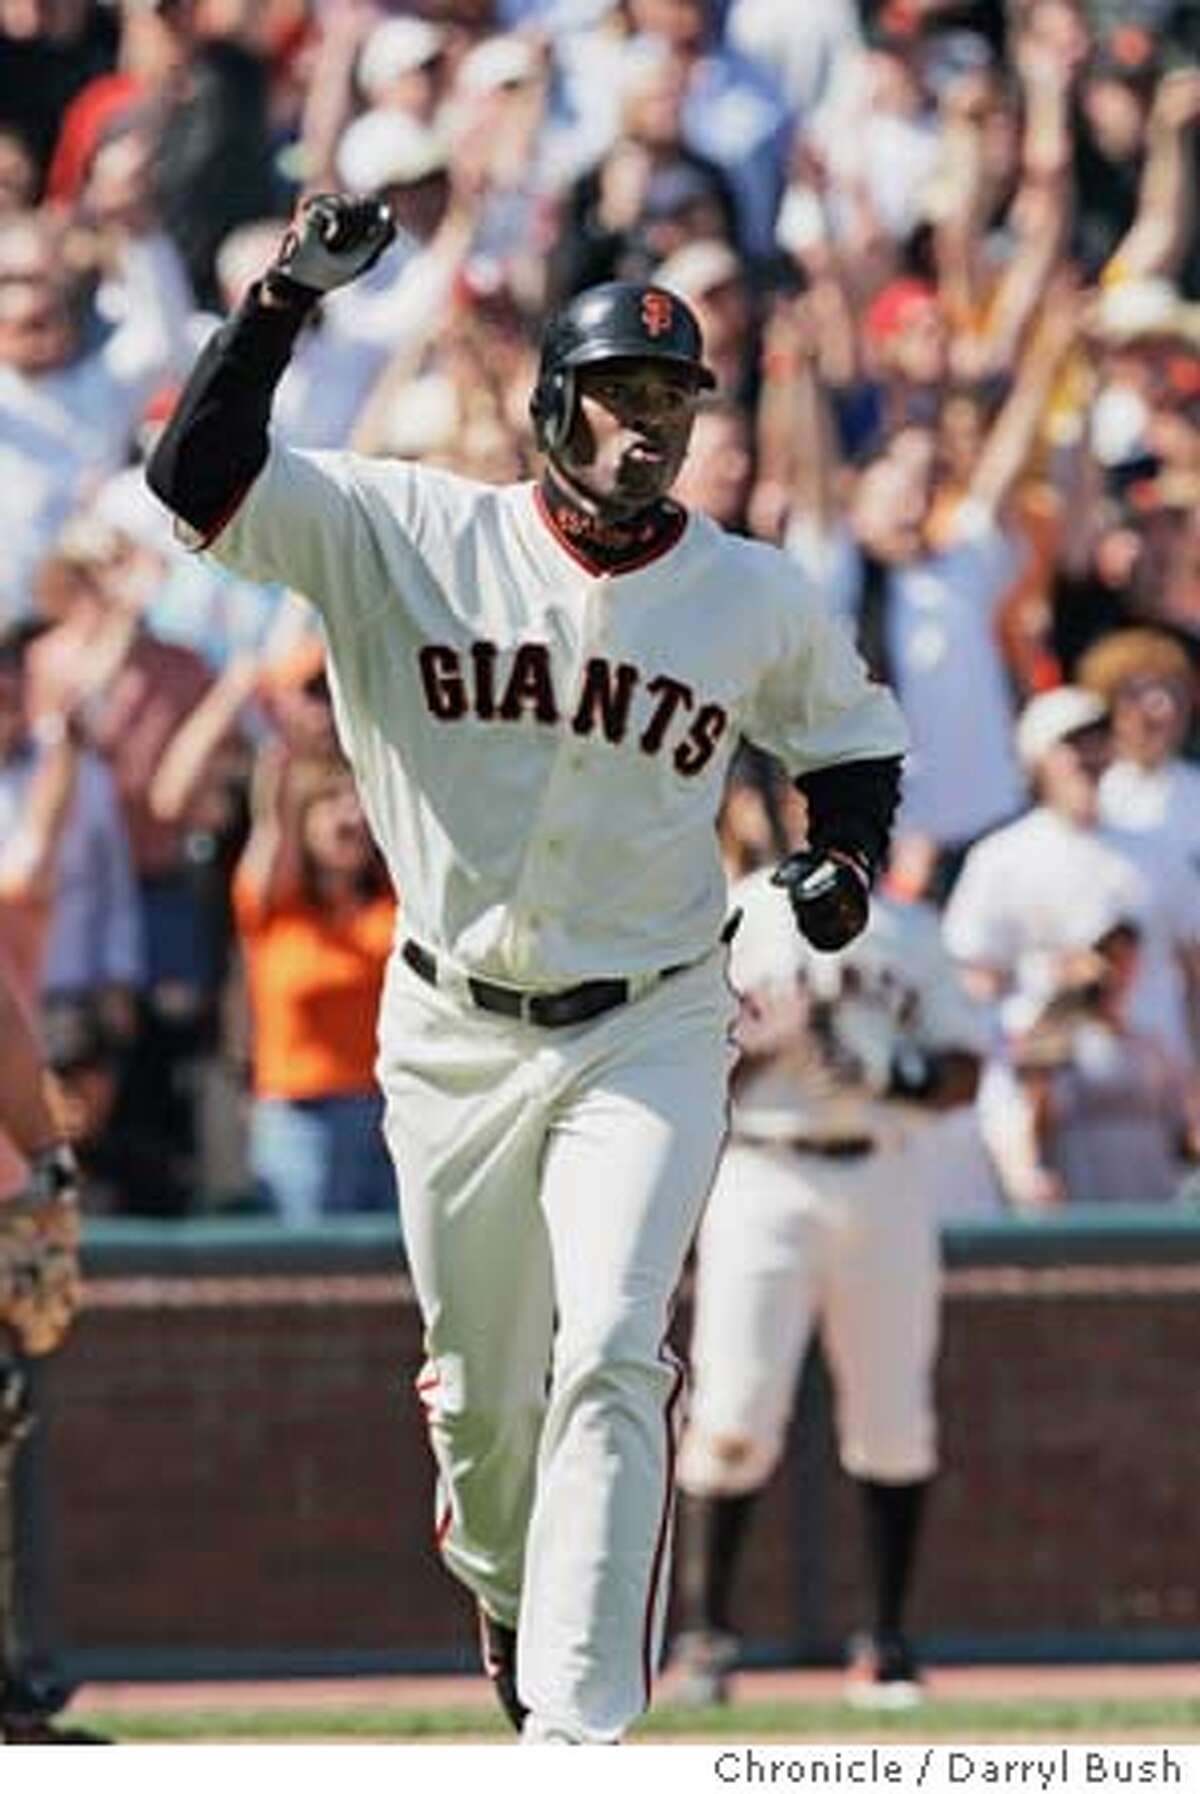 San Francisco Giants Michael Tucker celebrates after hitting a grand slam home run in the eighth inning vs. Colorado Rockies at SBC Park. Event on 4/9/05 in San Francisco. Darryl Bush / The Chronicle